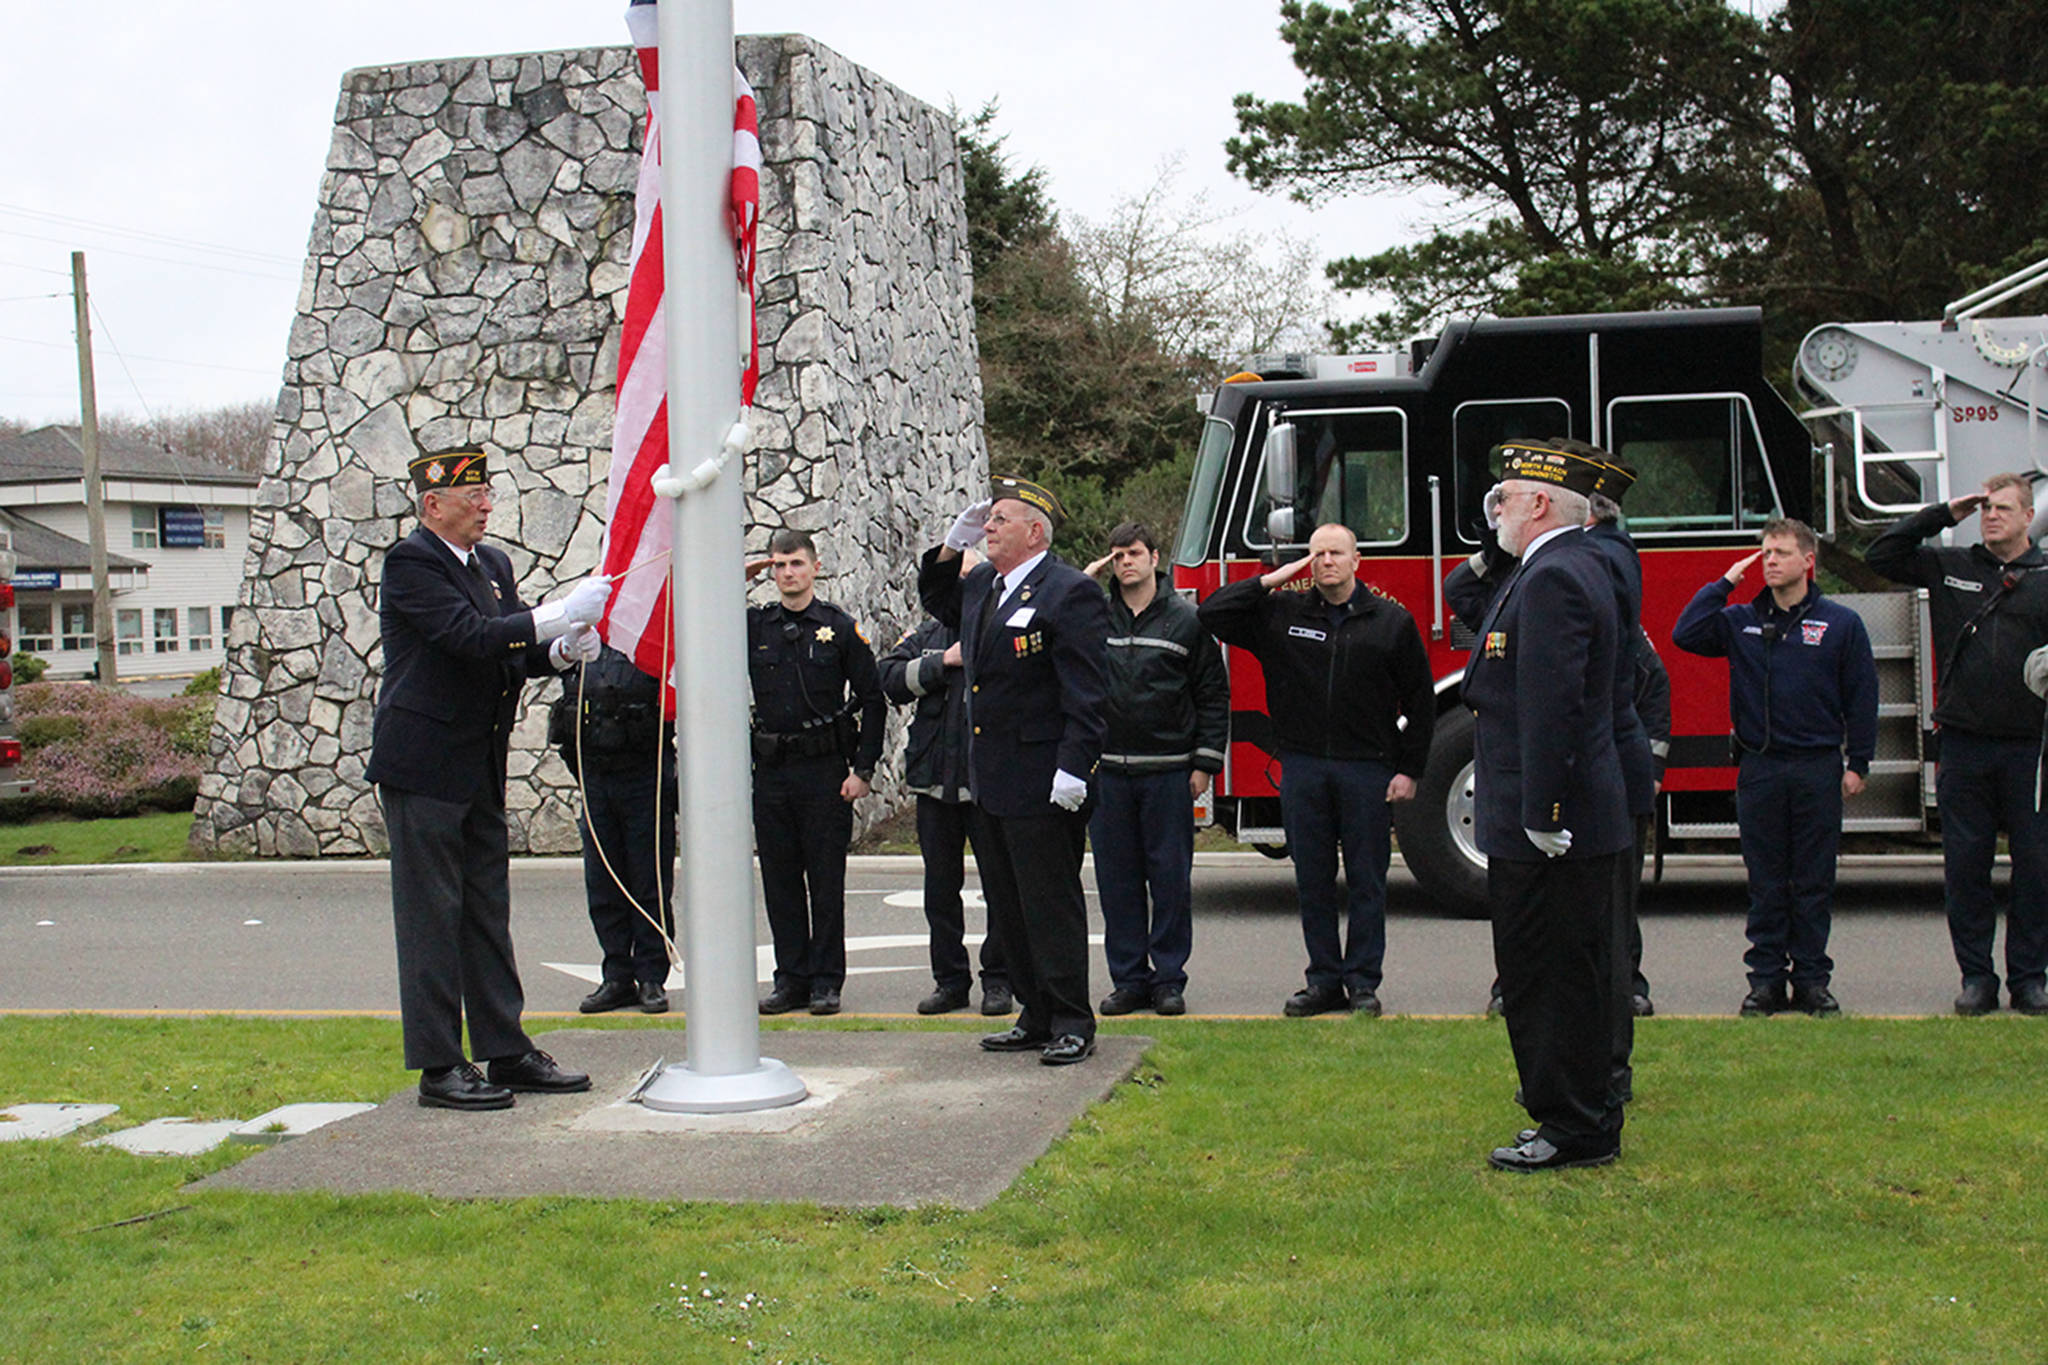 Angelo Bruscas/North Coast News photo: Members of VFW Post 8956, with Dennis Hogan, Dan Martin, John Link, and Jim Docherty, present the flag with Ocean Shores firefighters in the background.